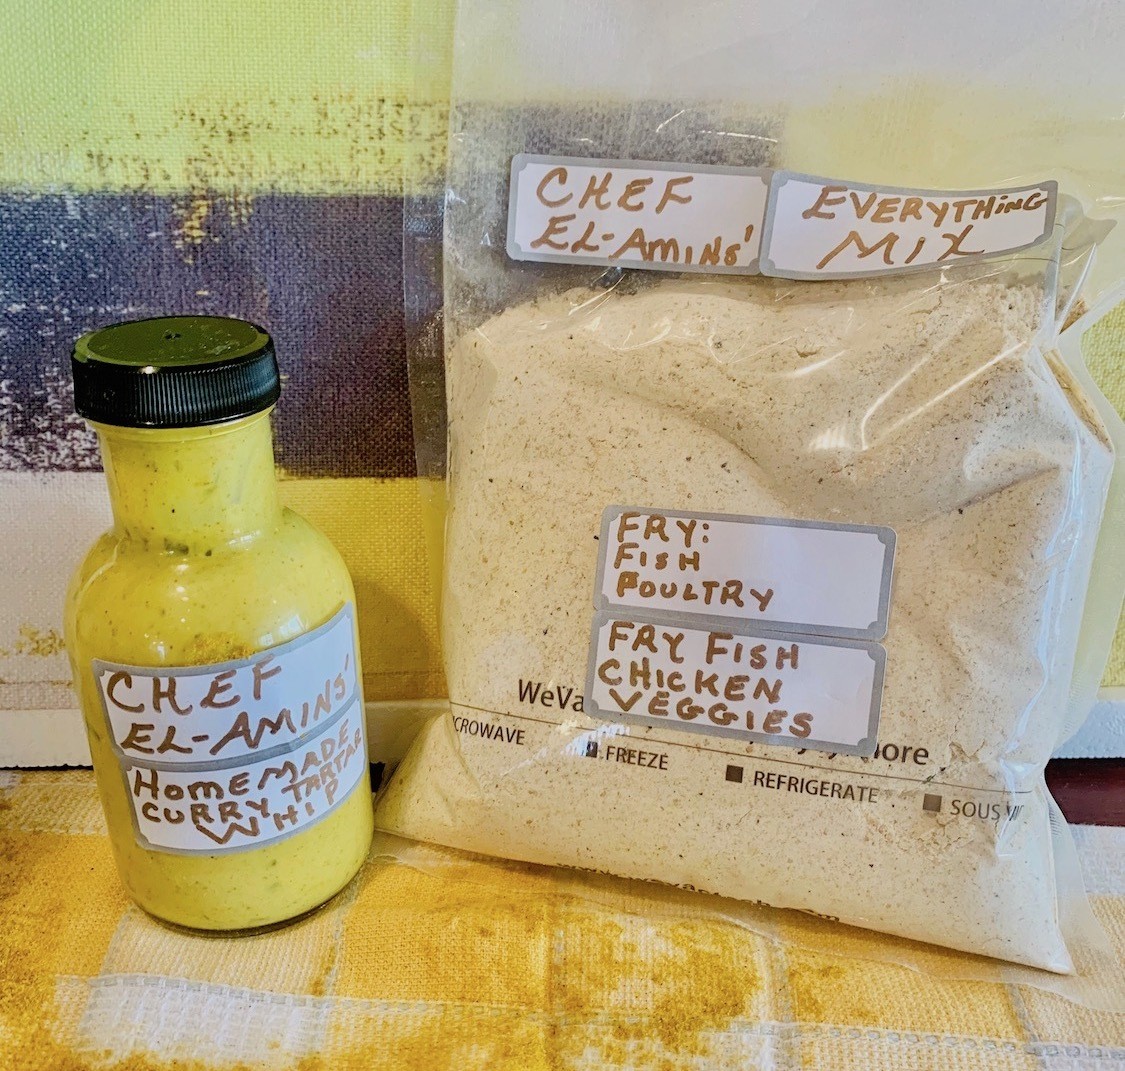 Fish fry mix and curry tatar sauce from Chef El-Amin's packaged food. October 2020